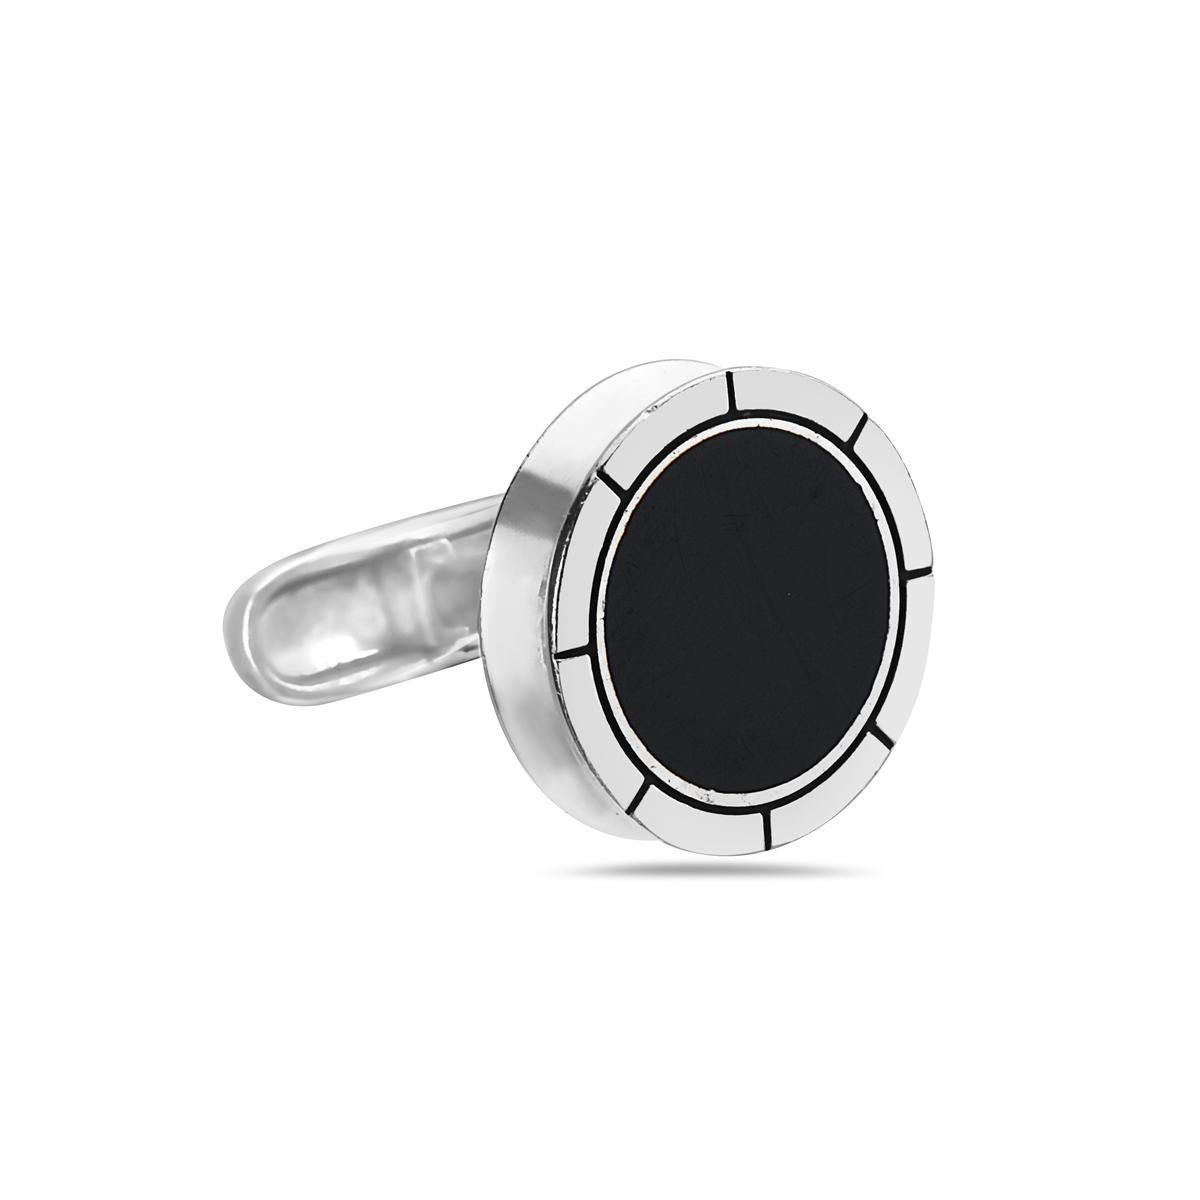 These BVLGARI cufflinks are crafted from sterling silver with a high polished finish, it features the round disc with BVLGARI engraved on the bezel with black onyx in the center. Signed BVLGARI.